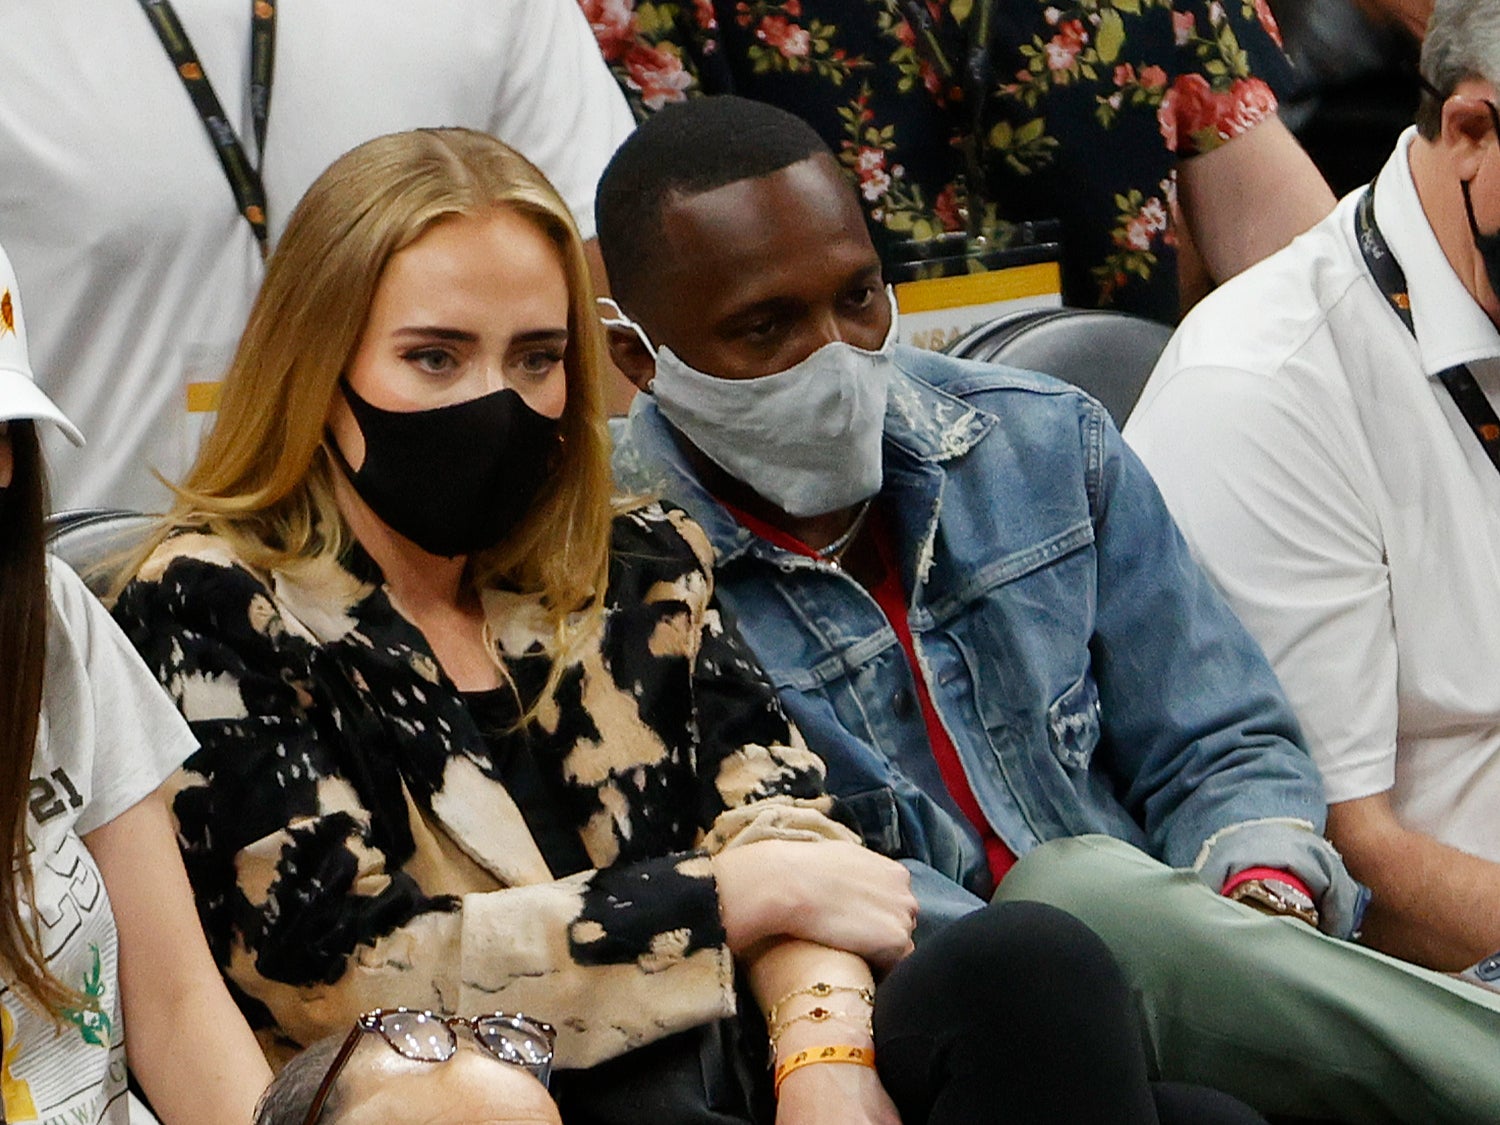 Adele And Rich Paul Relationship Timeline: Are They Married?